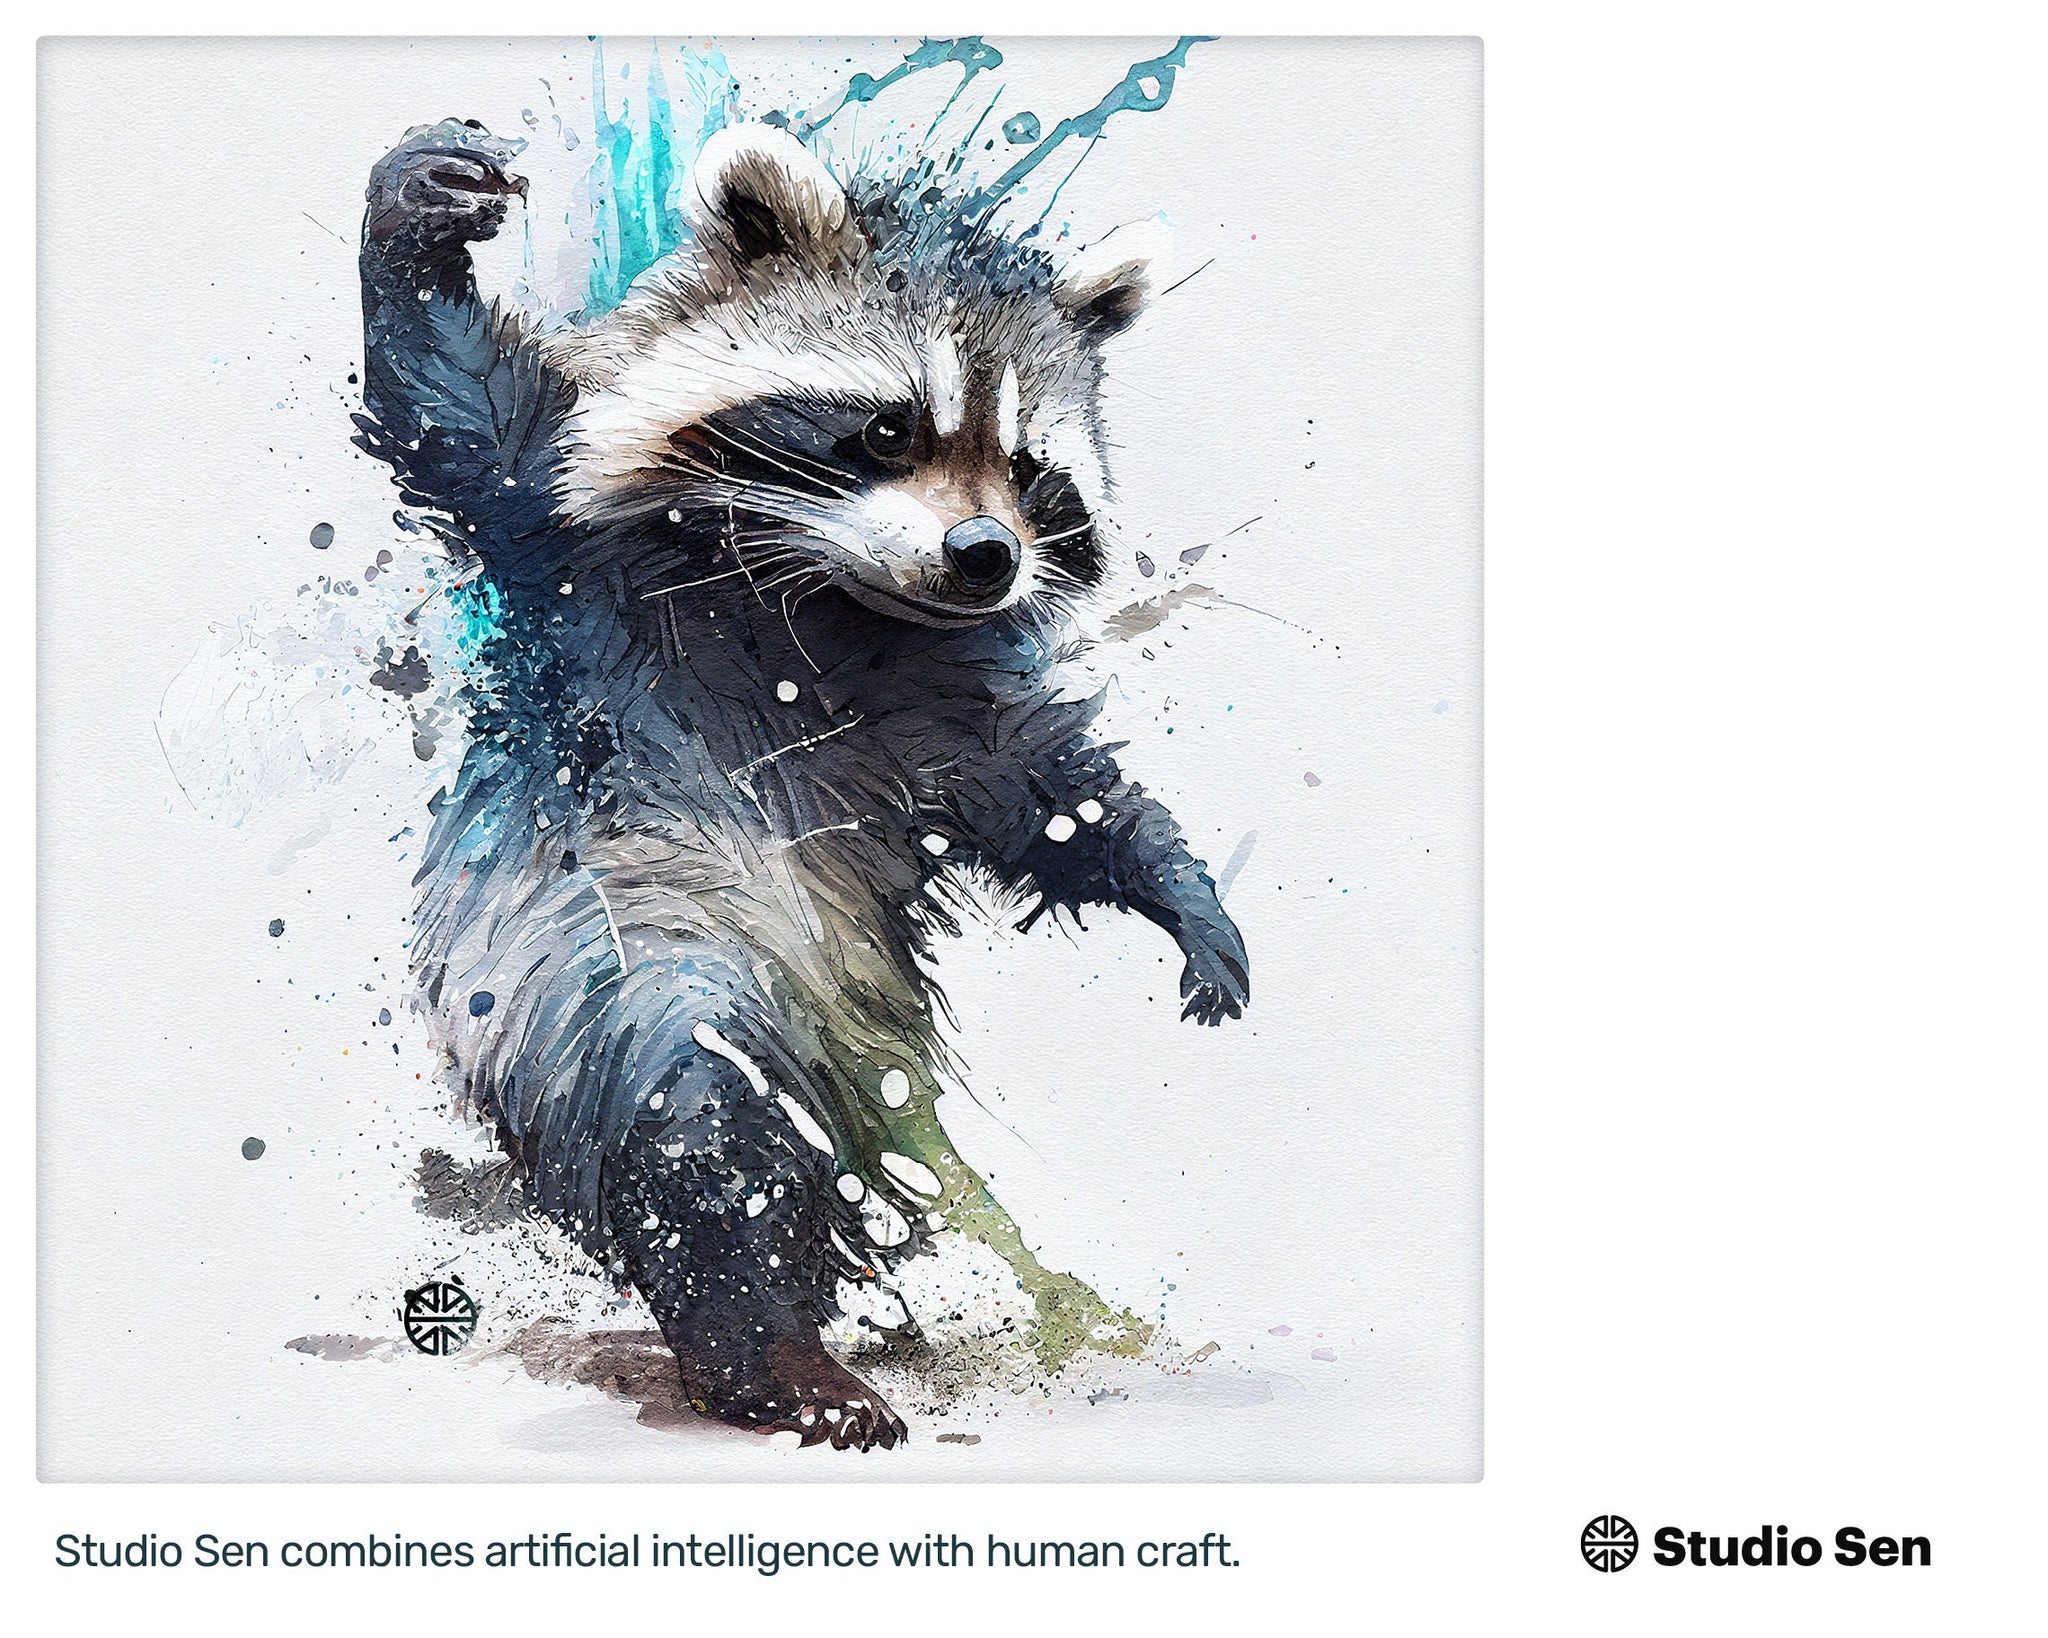 Samsung Art TV, Racoon Dab, premium download, drops and splashes, friendly wallpaper, art for kids